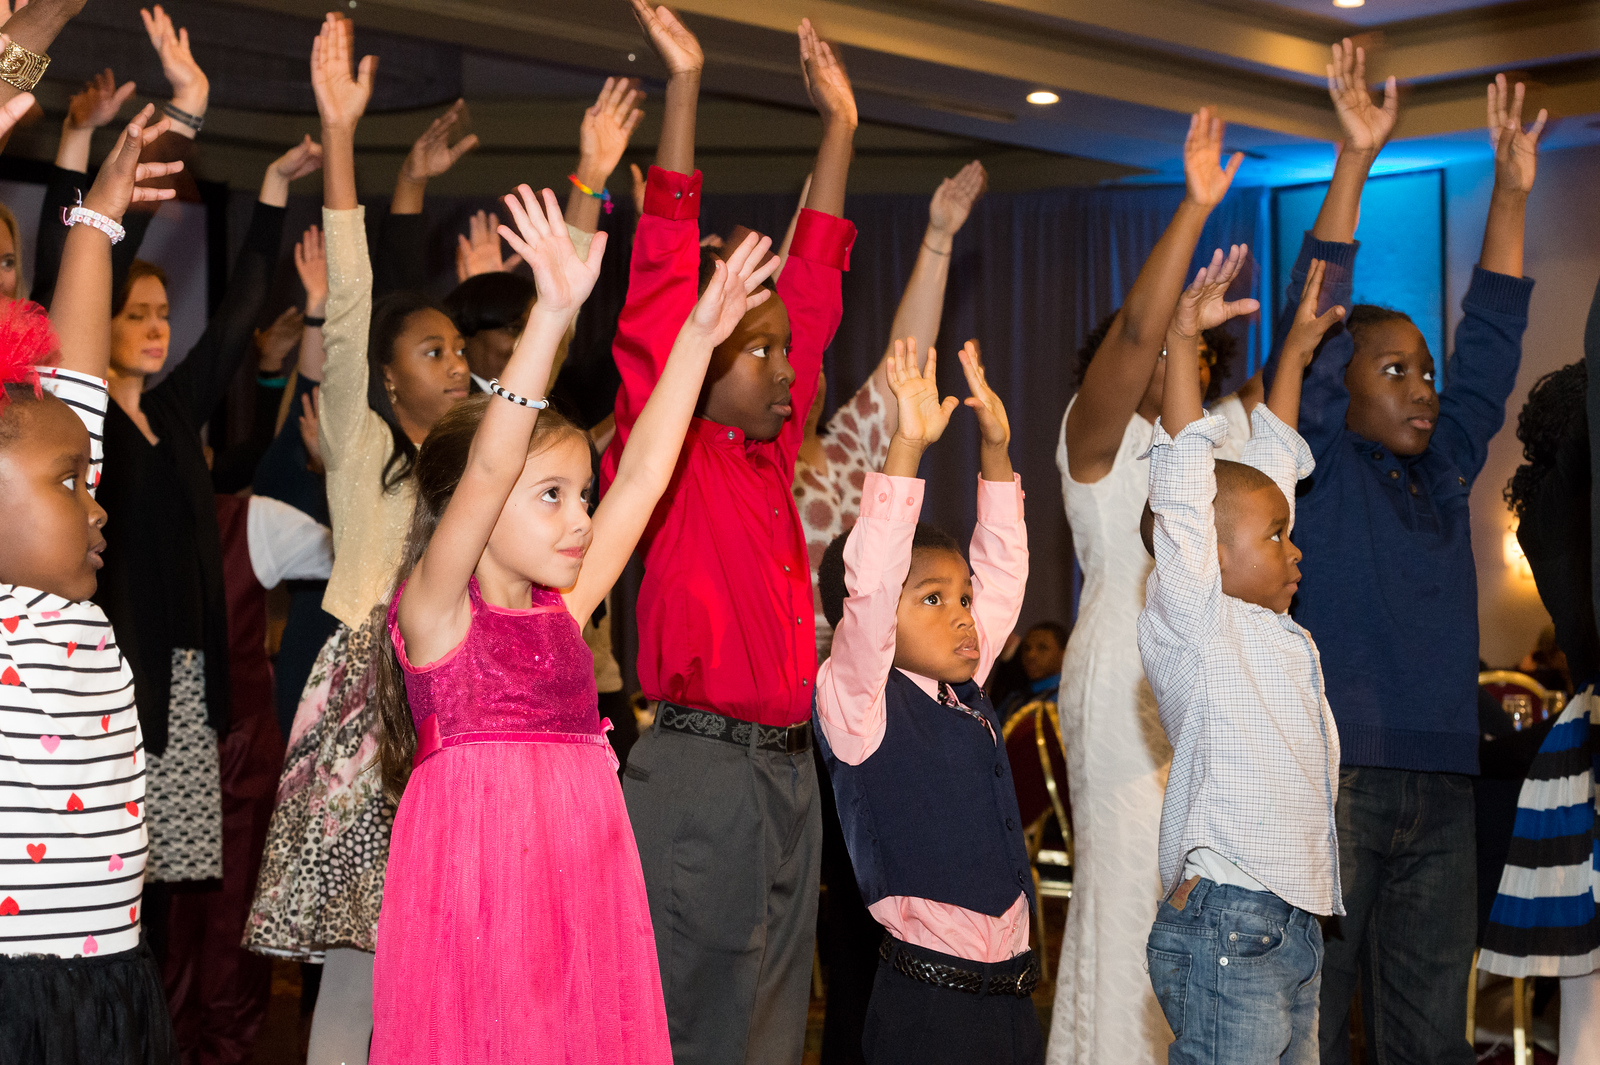 Children with their arms raised, dancing at 2016 Diocesan Convention